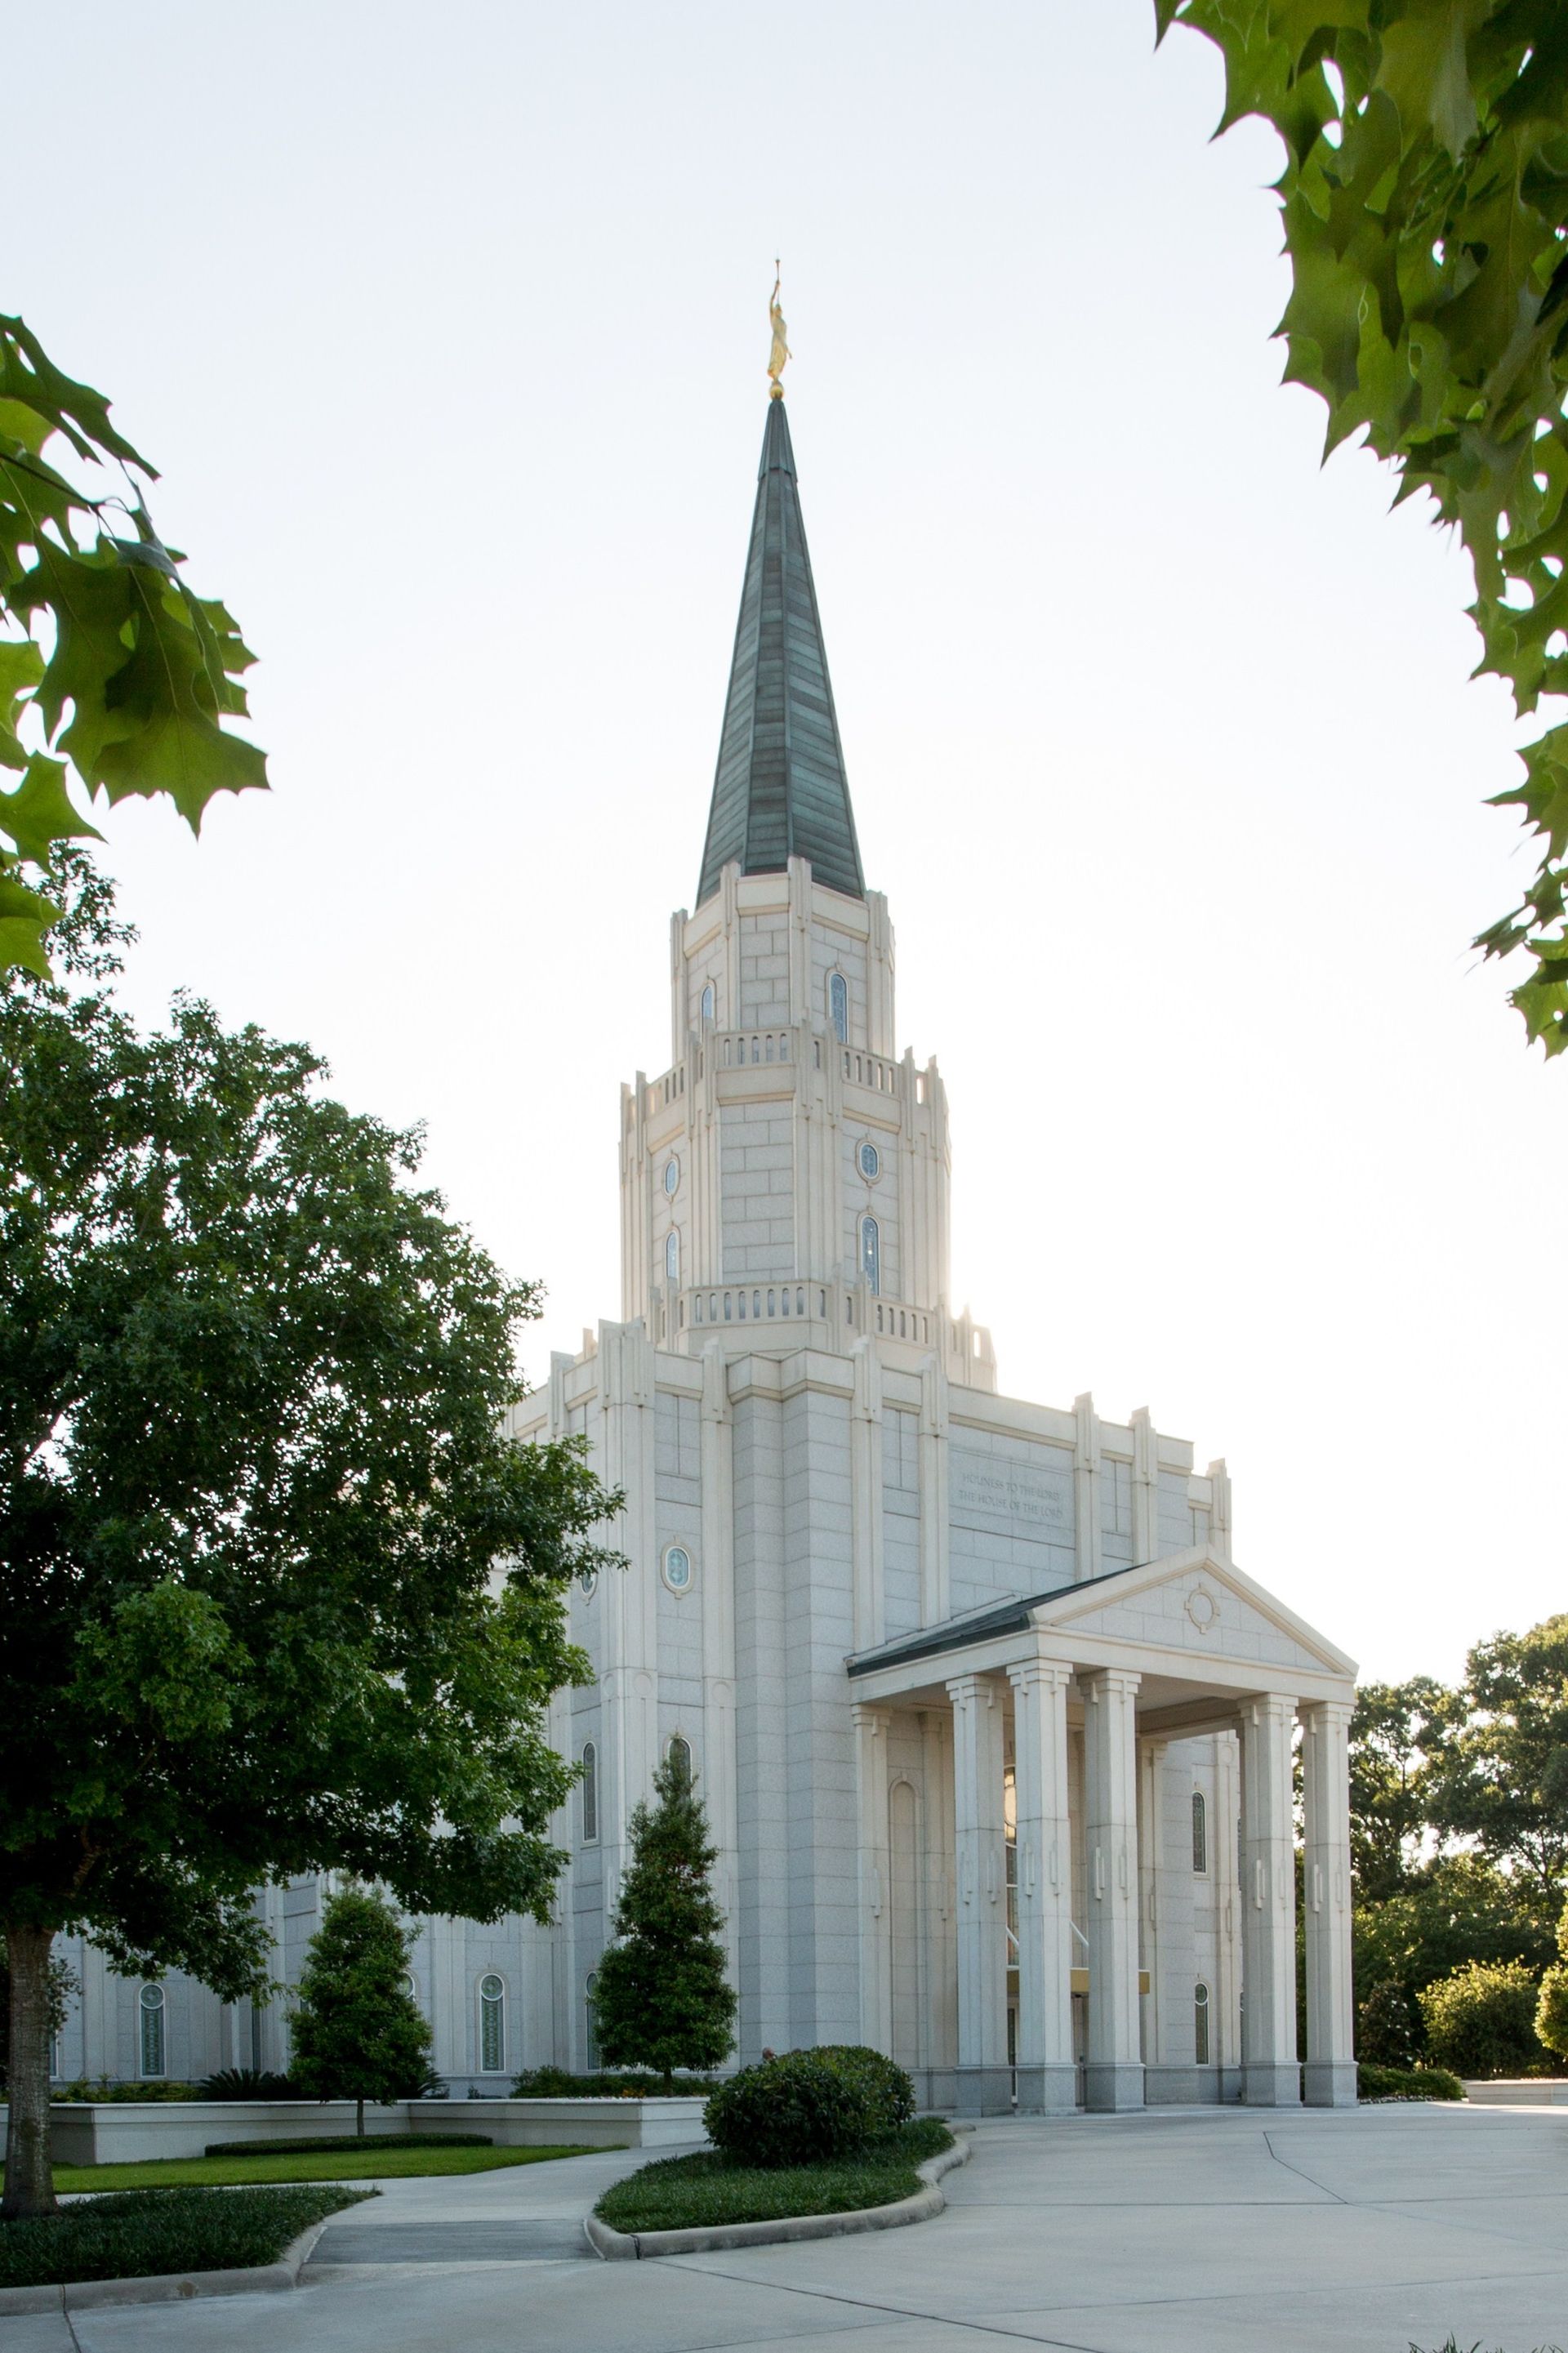 A portrait view to the entrance of the Houston Texas Temple.